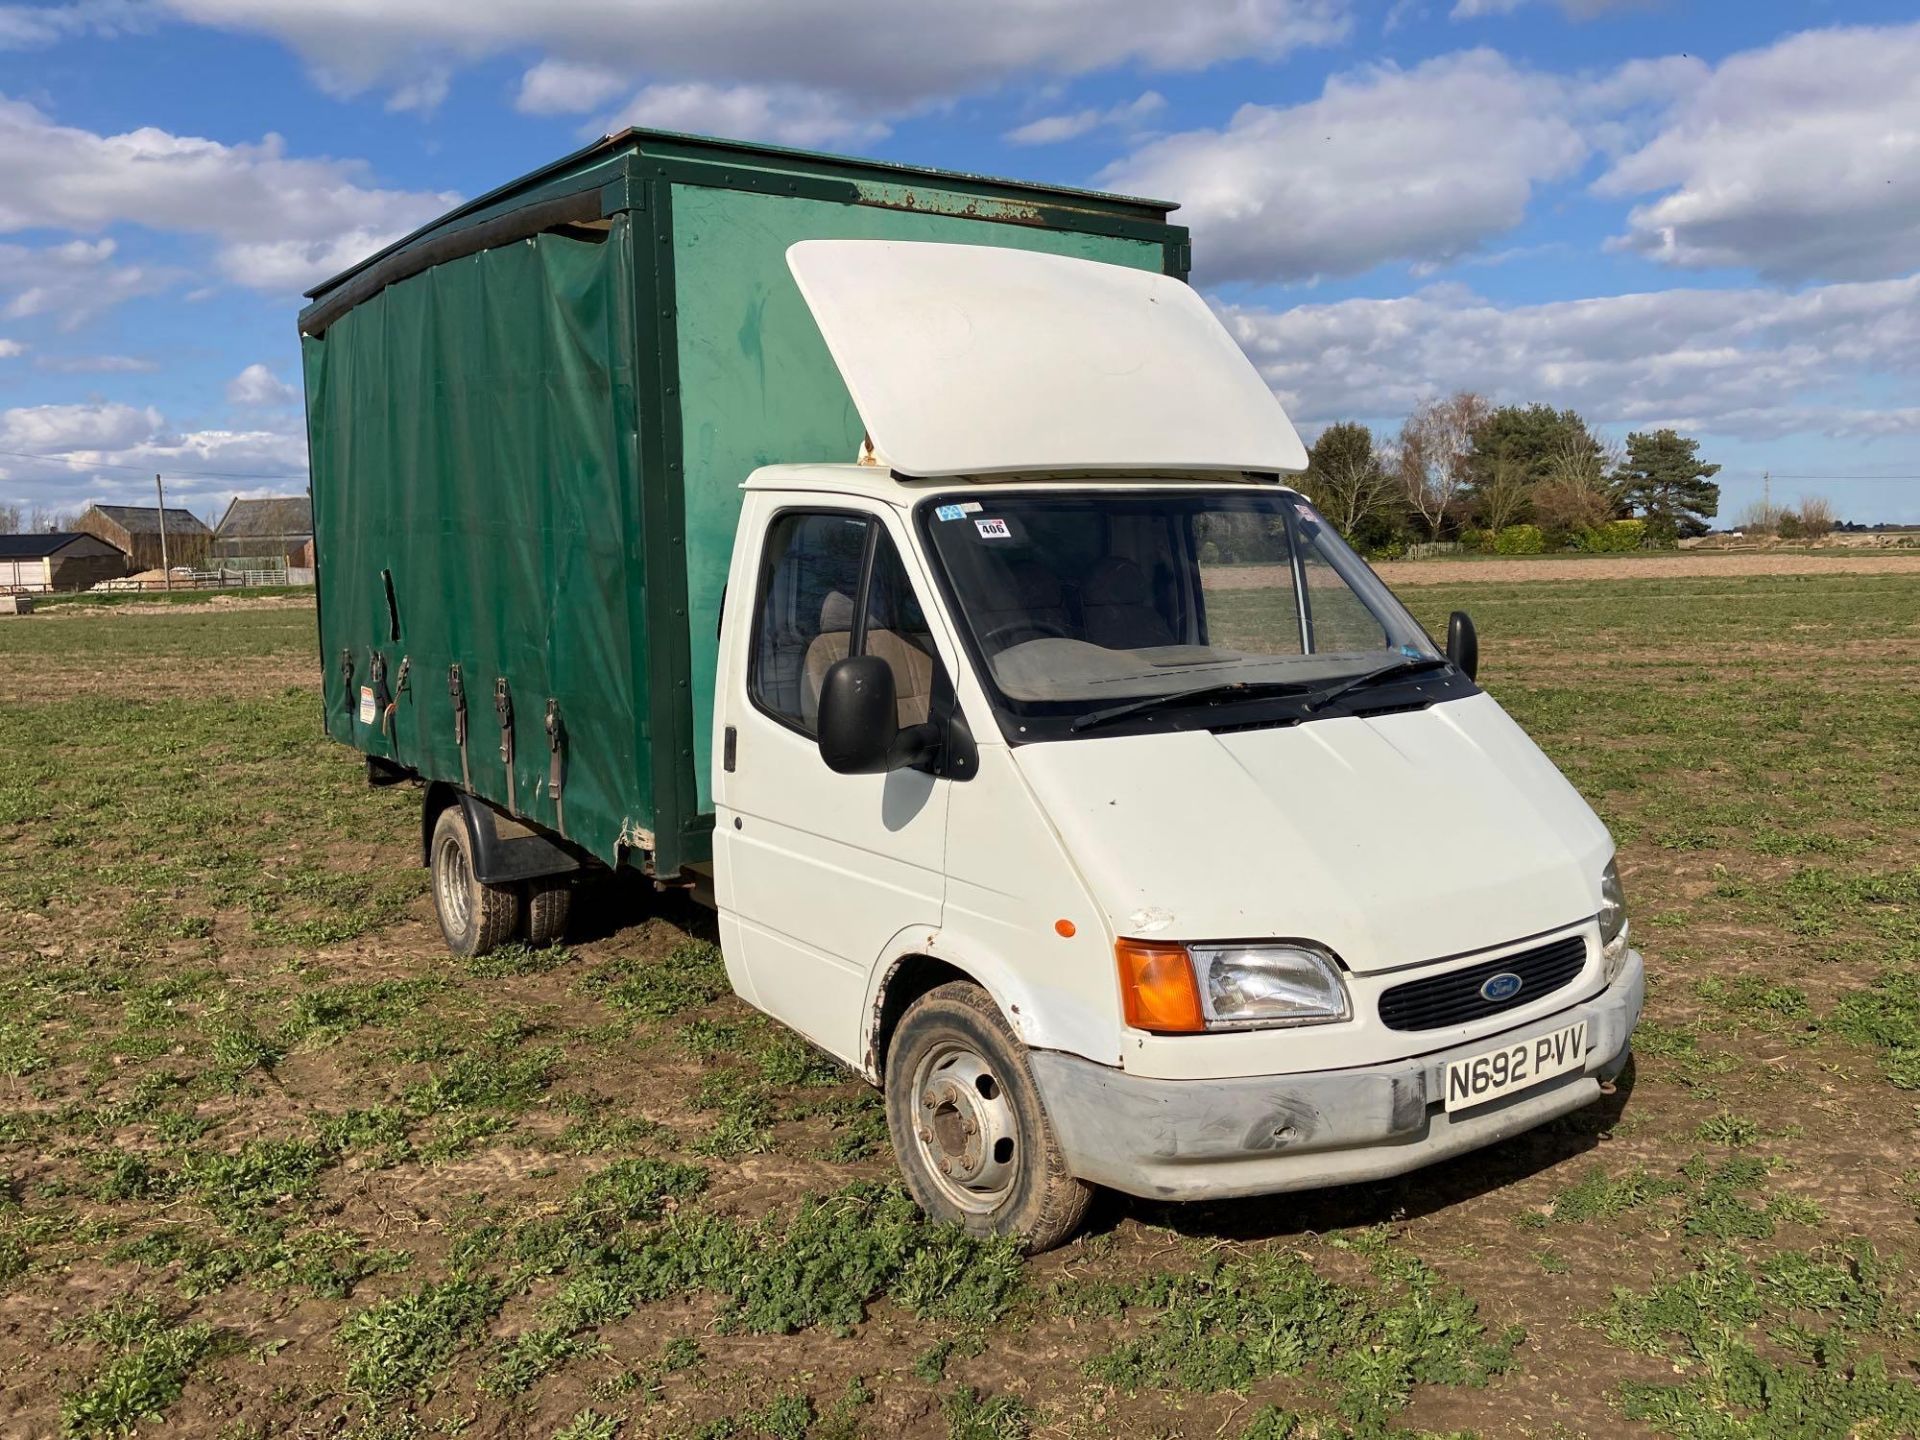 1995 Ford Transit curtain side manual van, twin wheel with 4m bed. Reg No: N692 PVV. Mileage: 292,24